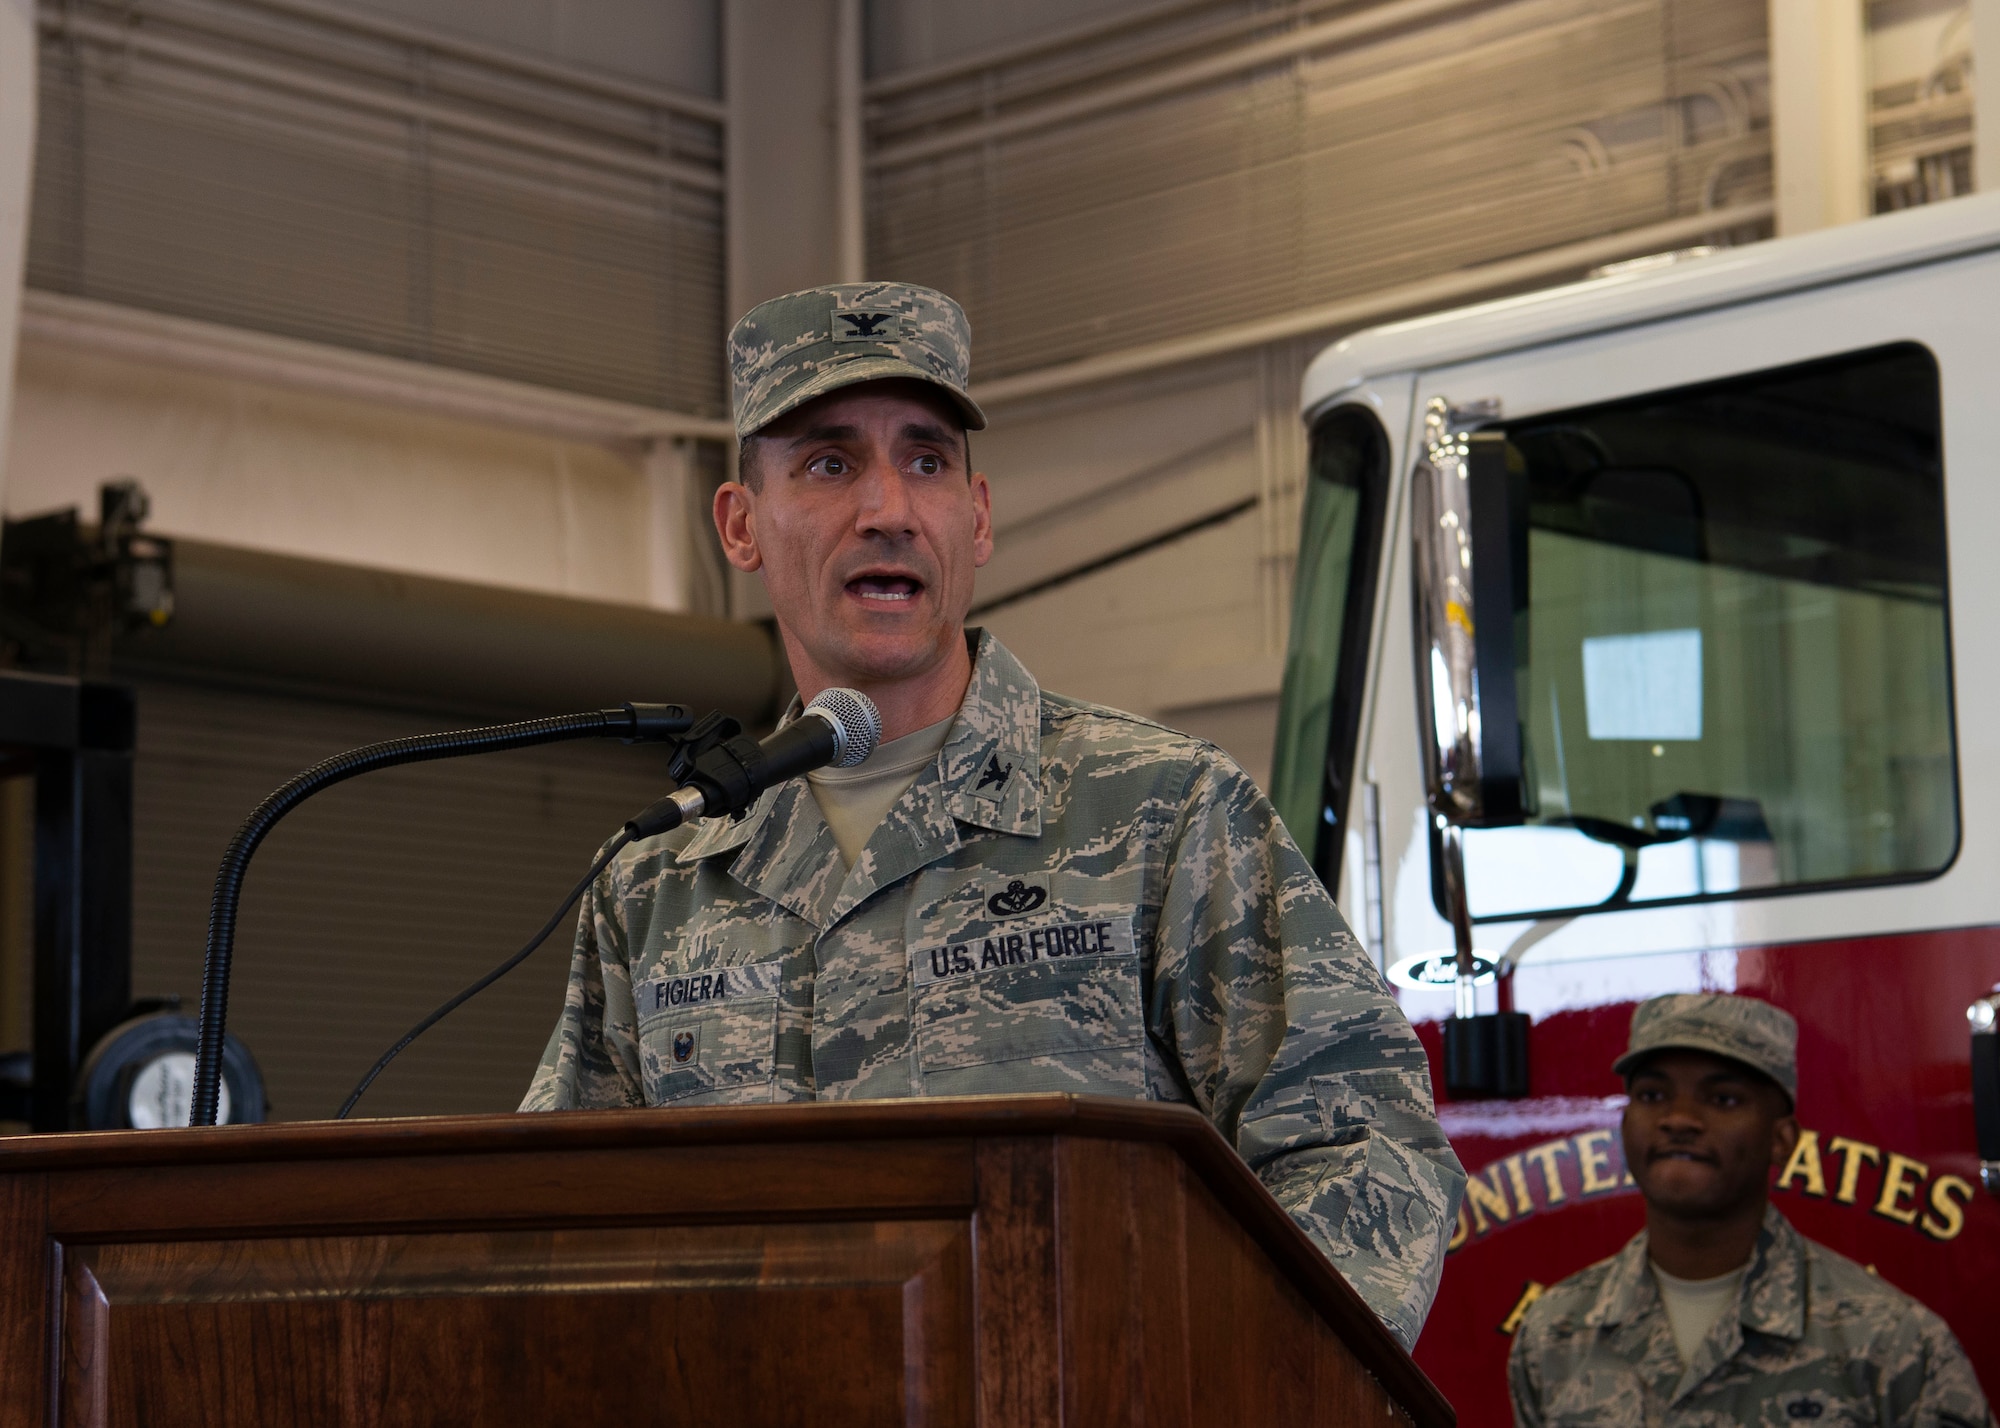 U.S. Air Force Col. Anthony Figiera, commander 99th Mission Support Group, speaks after assuming command of the 99th MSG at Nellis AFB, July 7, 2019. Figiera is directly responsible for contracting, communications, civil engineering, force support, logistics readiness, and security for Air Combat Command’s largest installation. (U.S. Air Force photo by SrA Stephanie Gelardo)